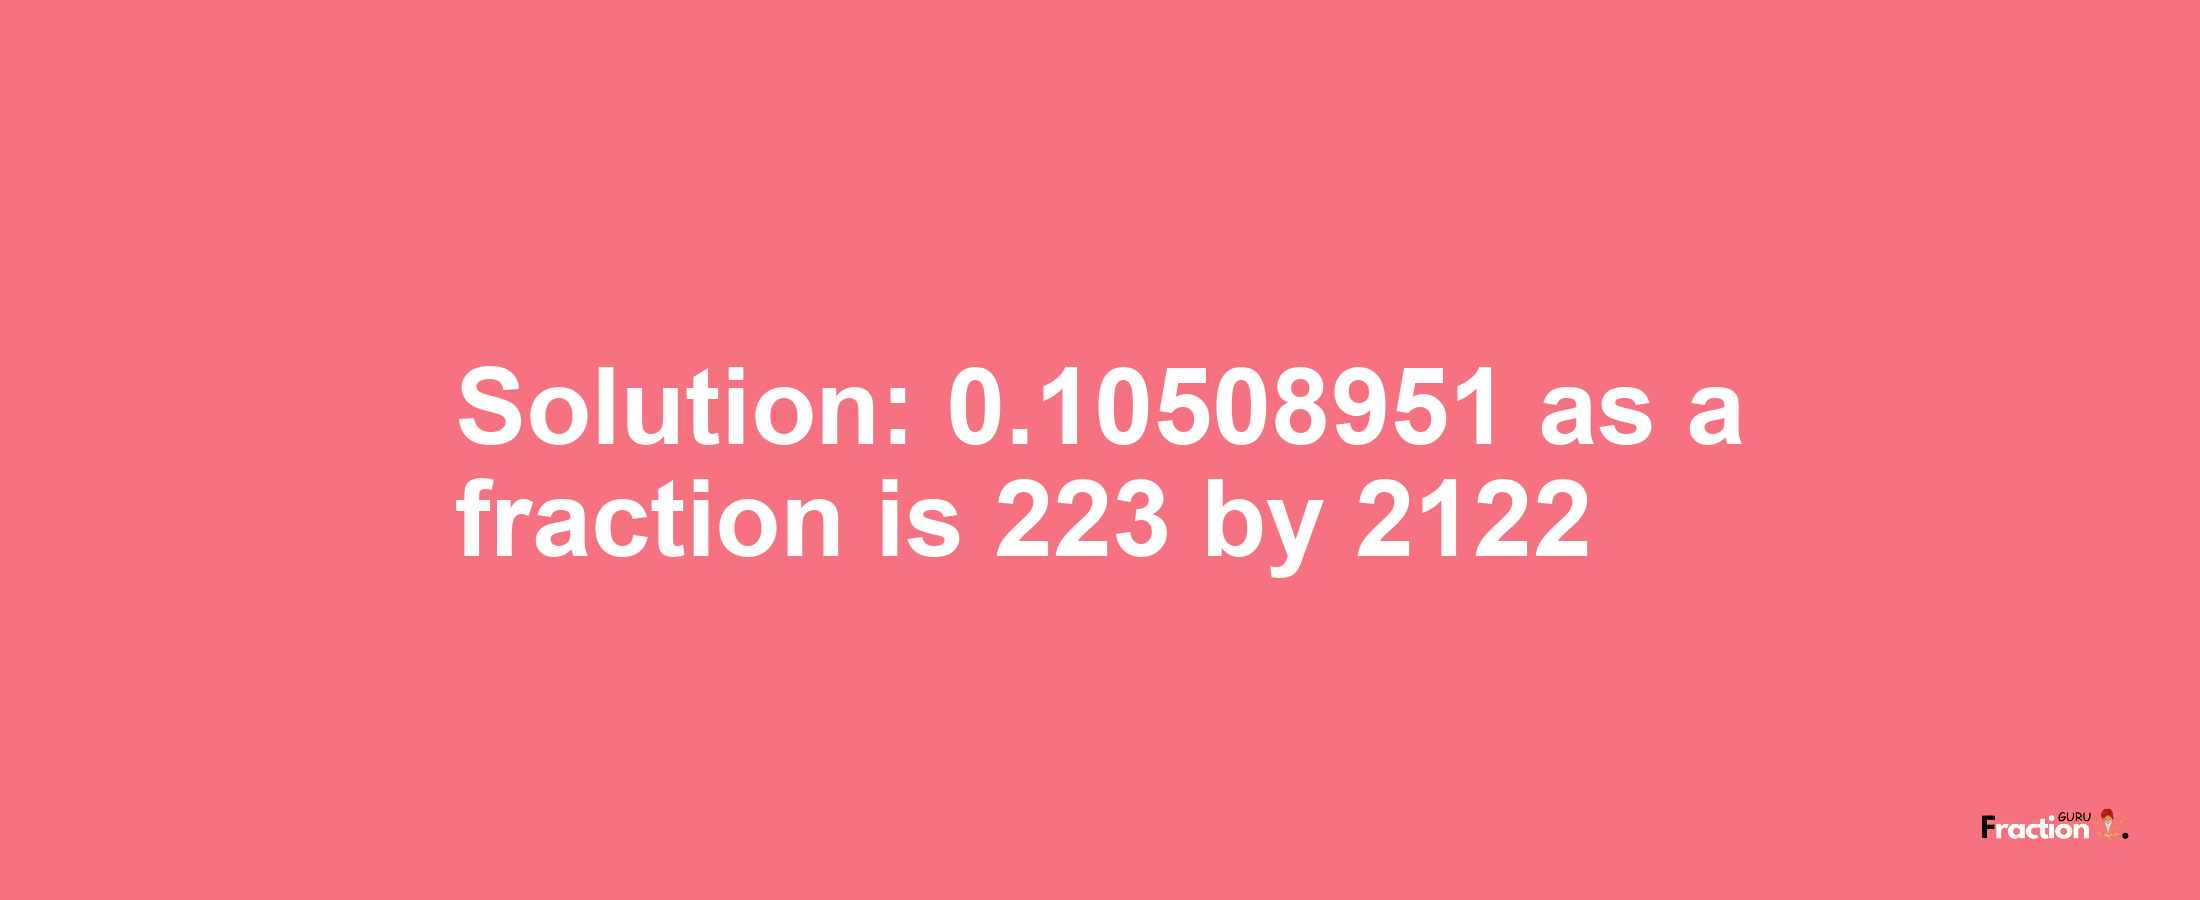 Solution:0.10508951 as a fraction is 223/2122